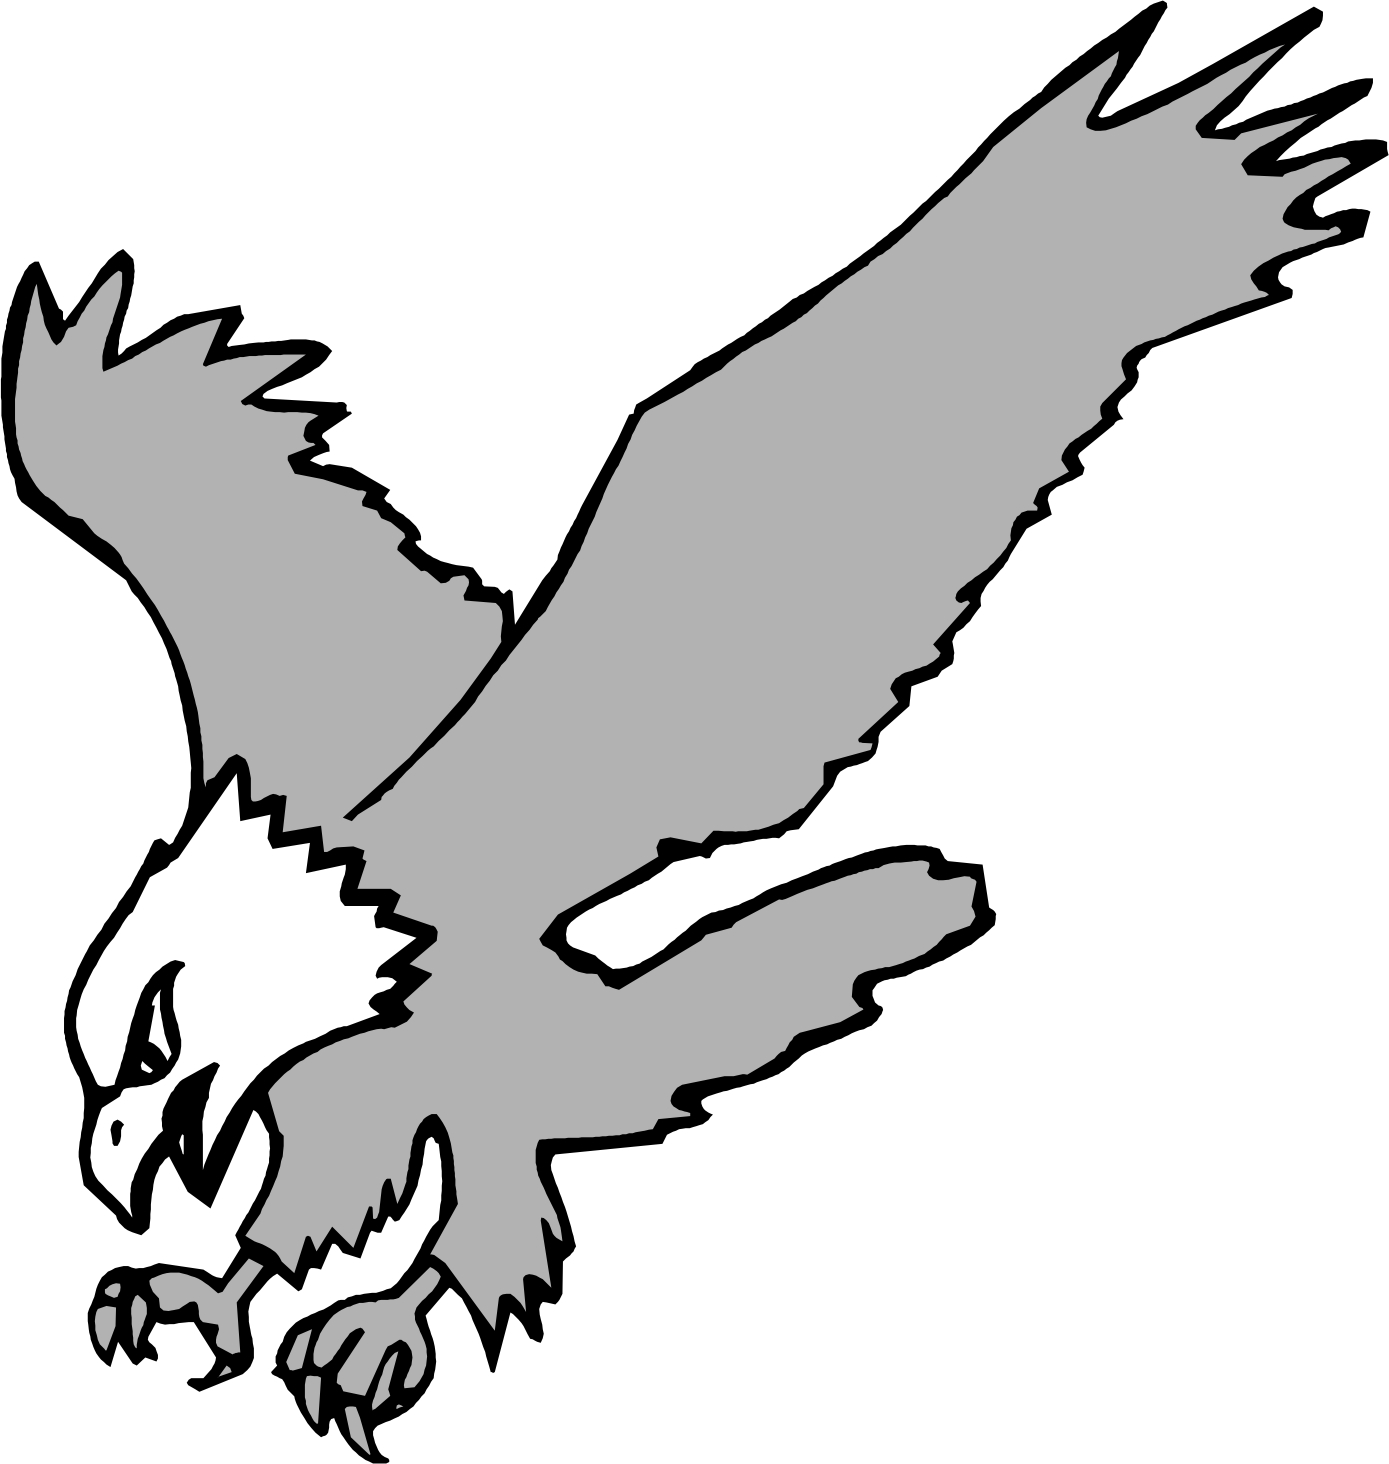 Cartoon Eagle | Page 3 - ClipArt Best - ClipArt Best